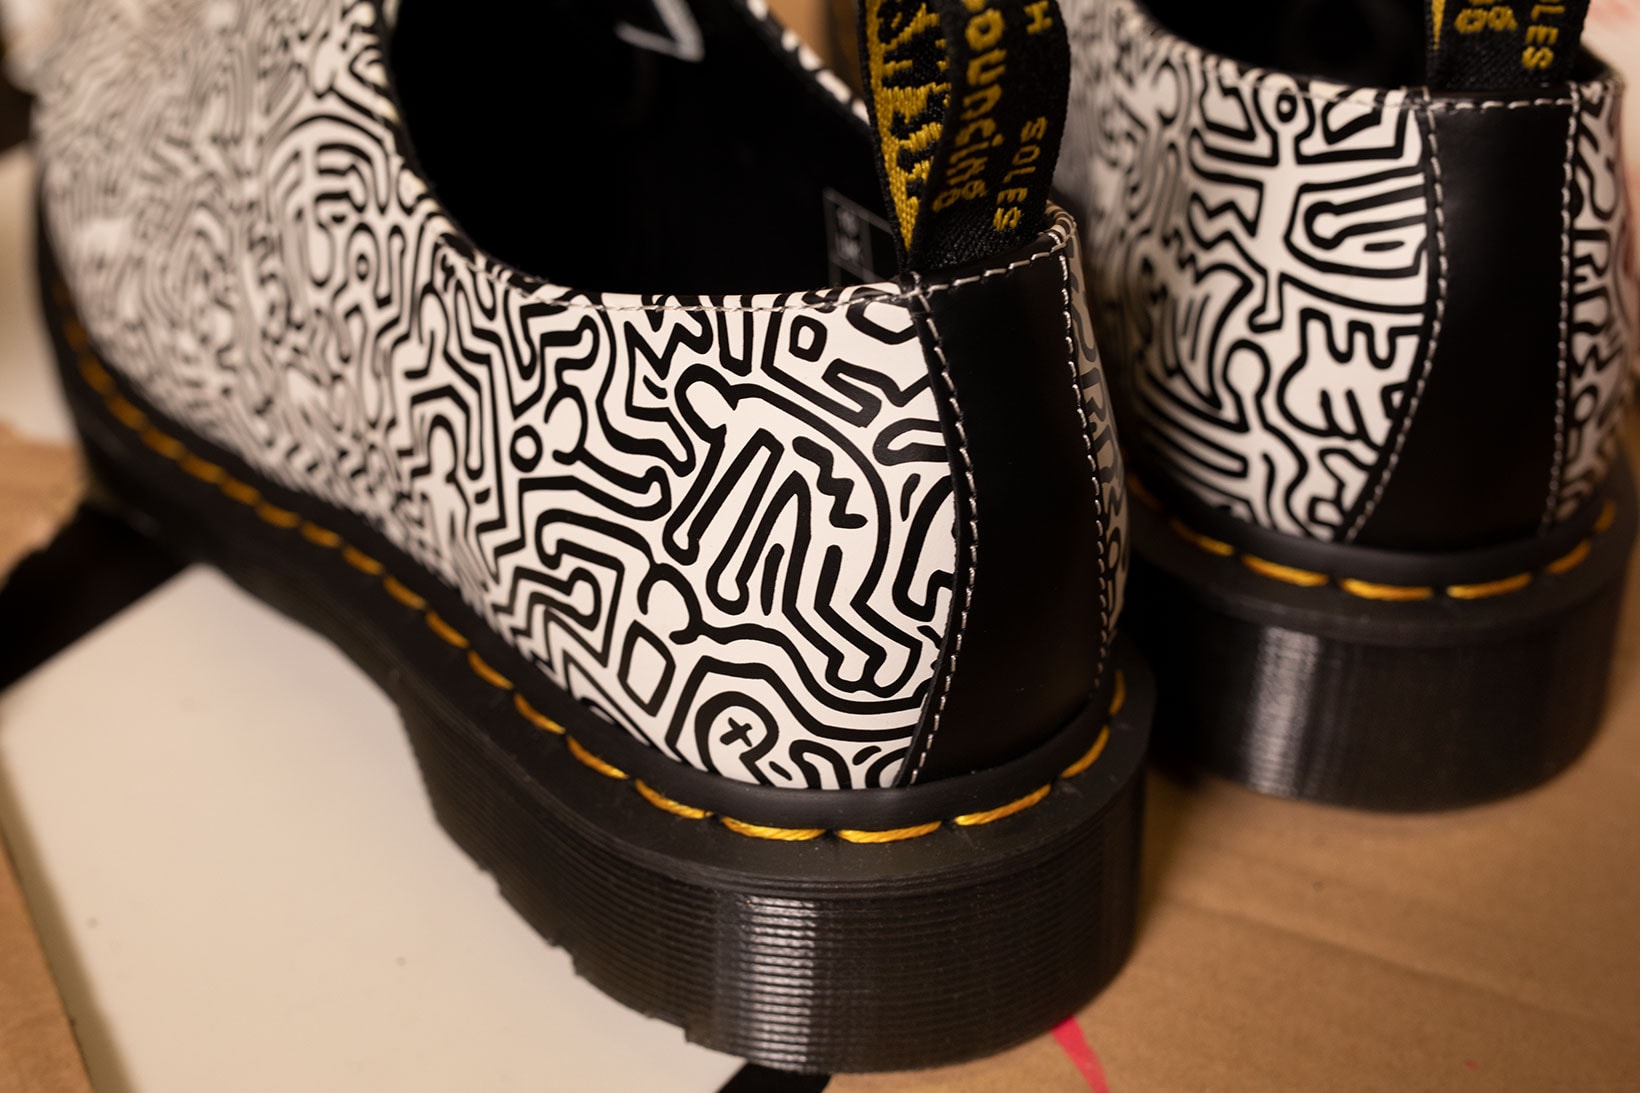 Dr. Martens Keith Haring Collaboration Boots Shoes 1461 Derby White Black Heel Rear Yellow Stitching